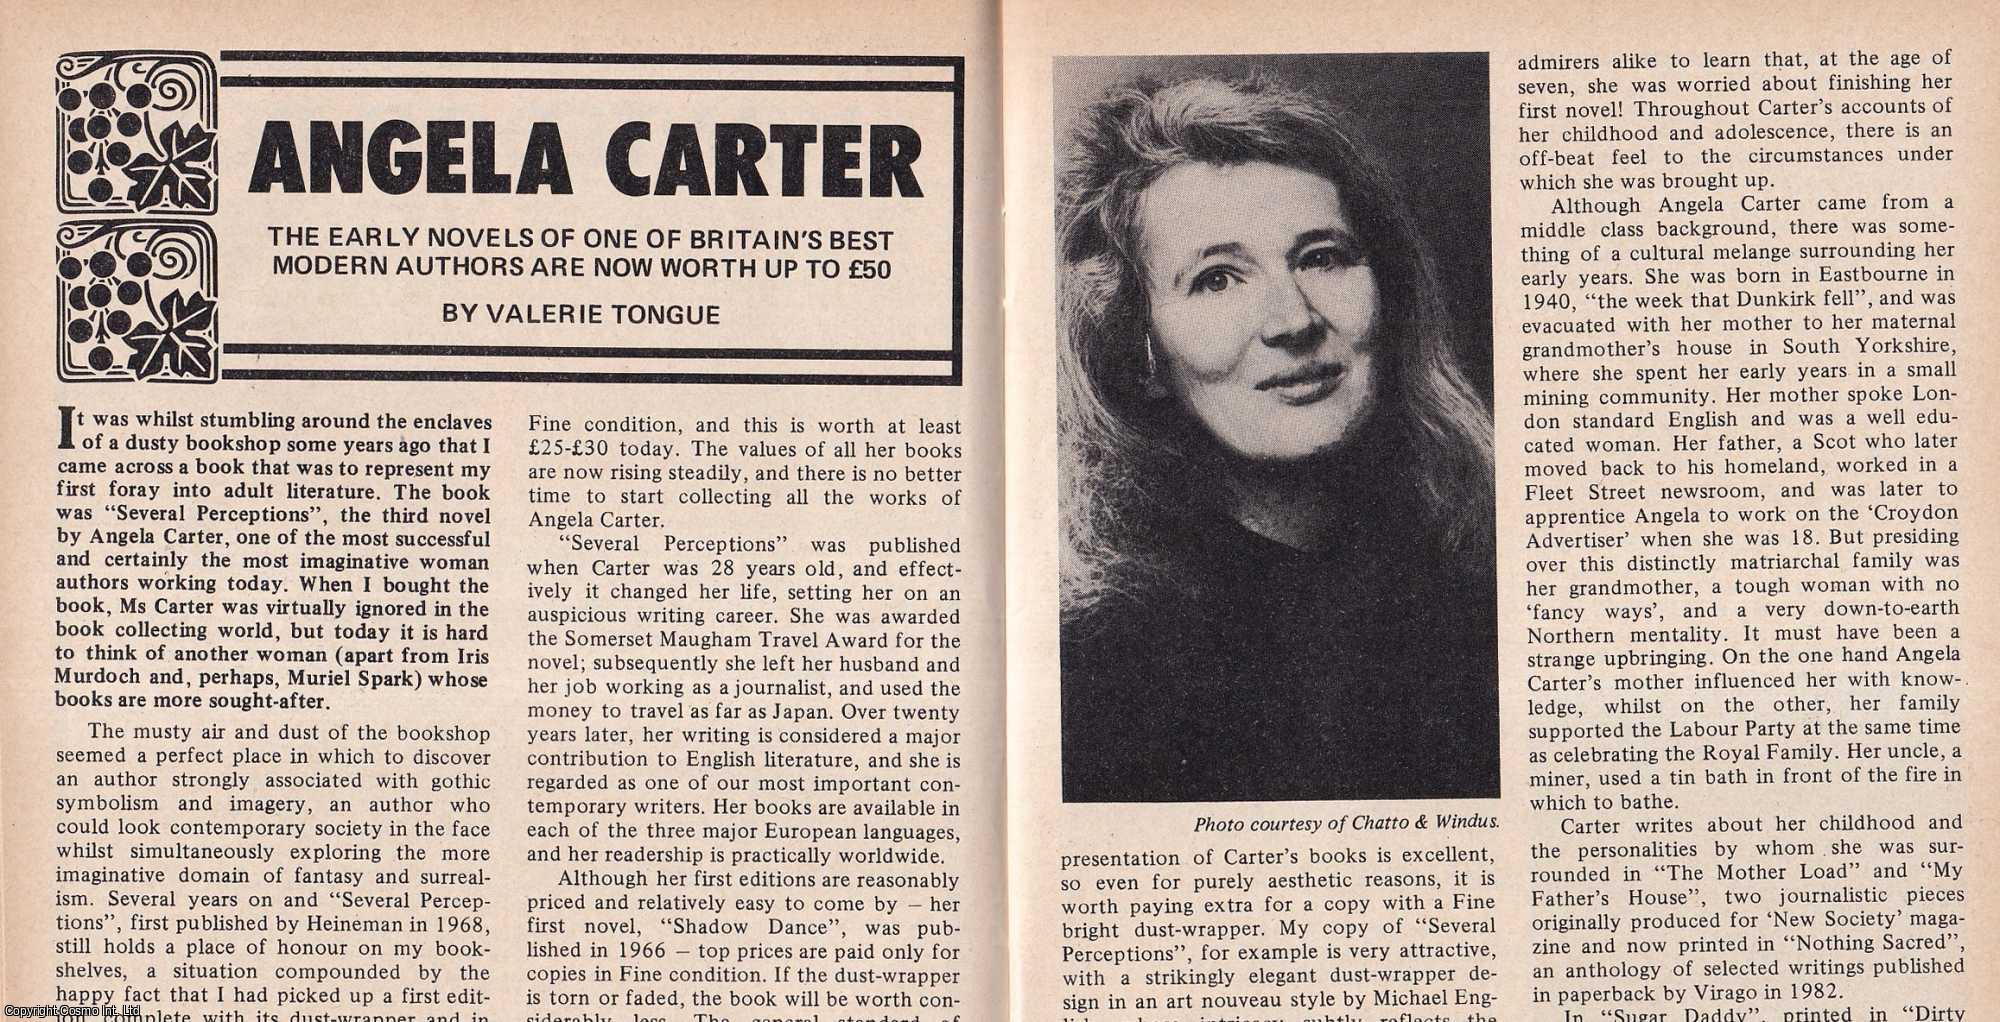 Valerie Tongue - Angela Carter. The Early Novels. This is an original article separated from an issue of The Book & Magazine Collector publication, 1990.